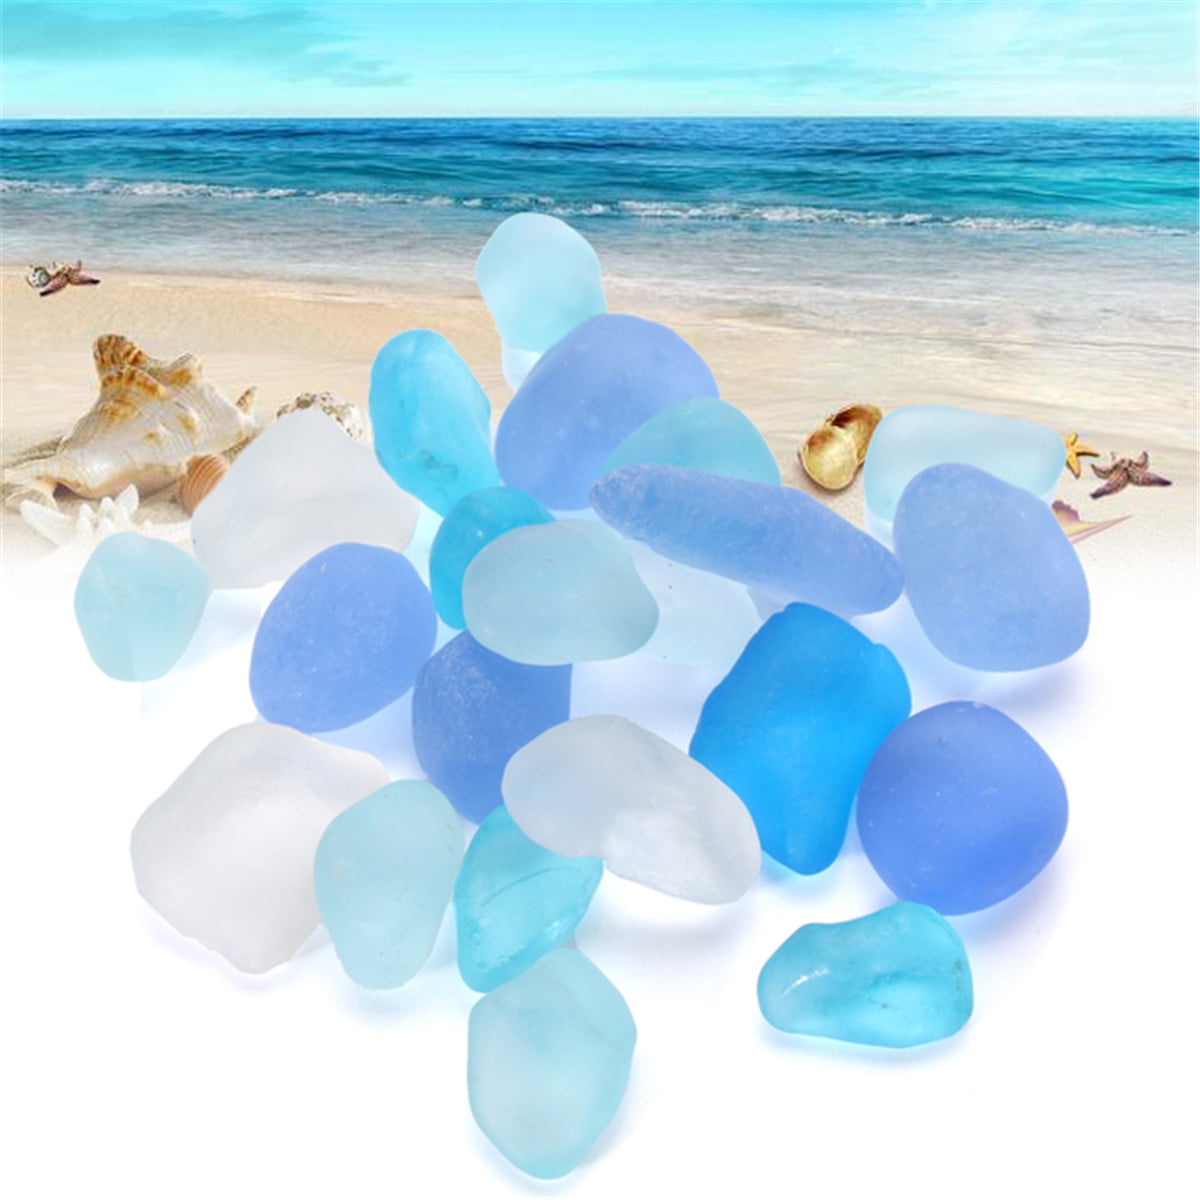 12-16mm Length Deep Blue, Big 30 Pieces Sea Glass Beads/Beach Glass Beads Not Drilled for Jewelry Making